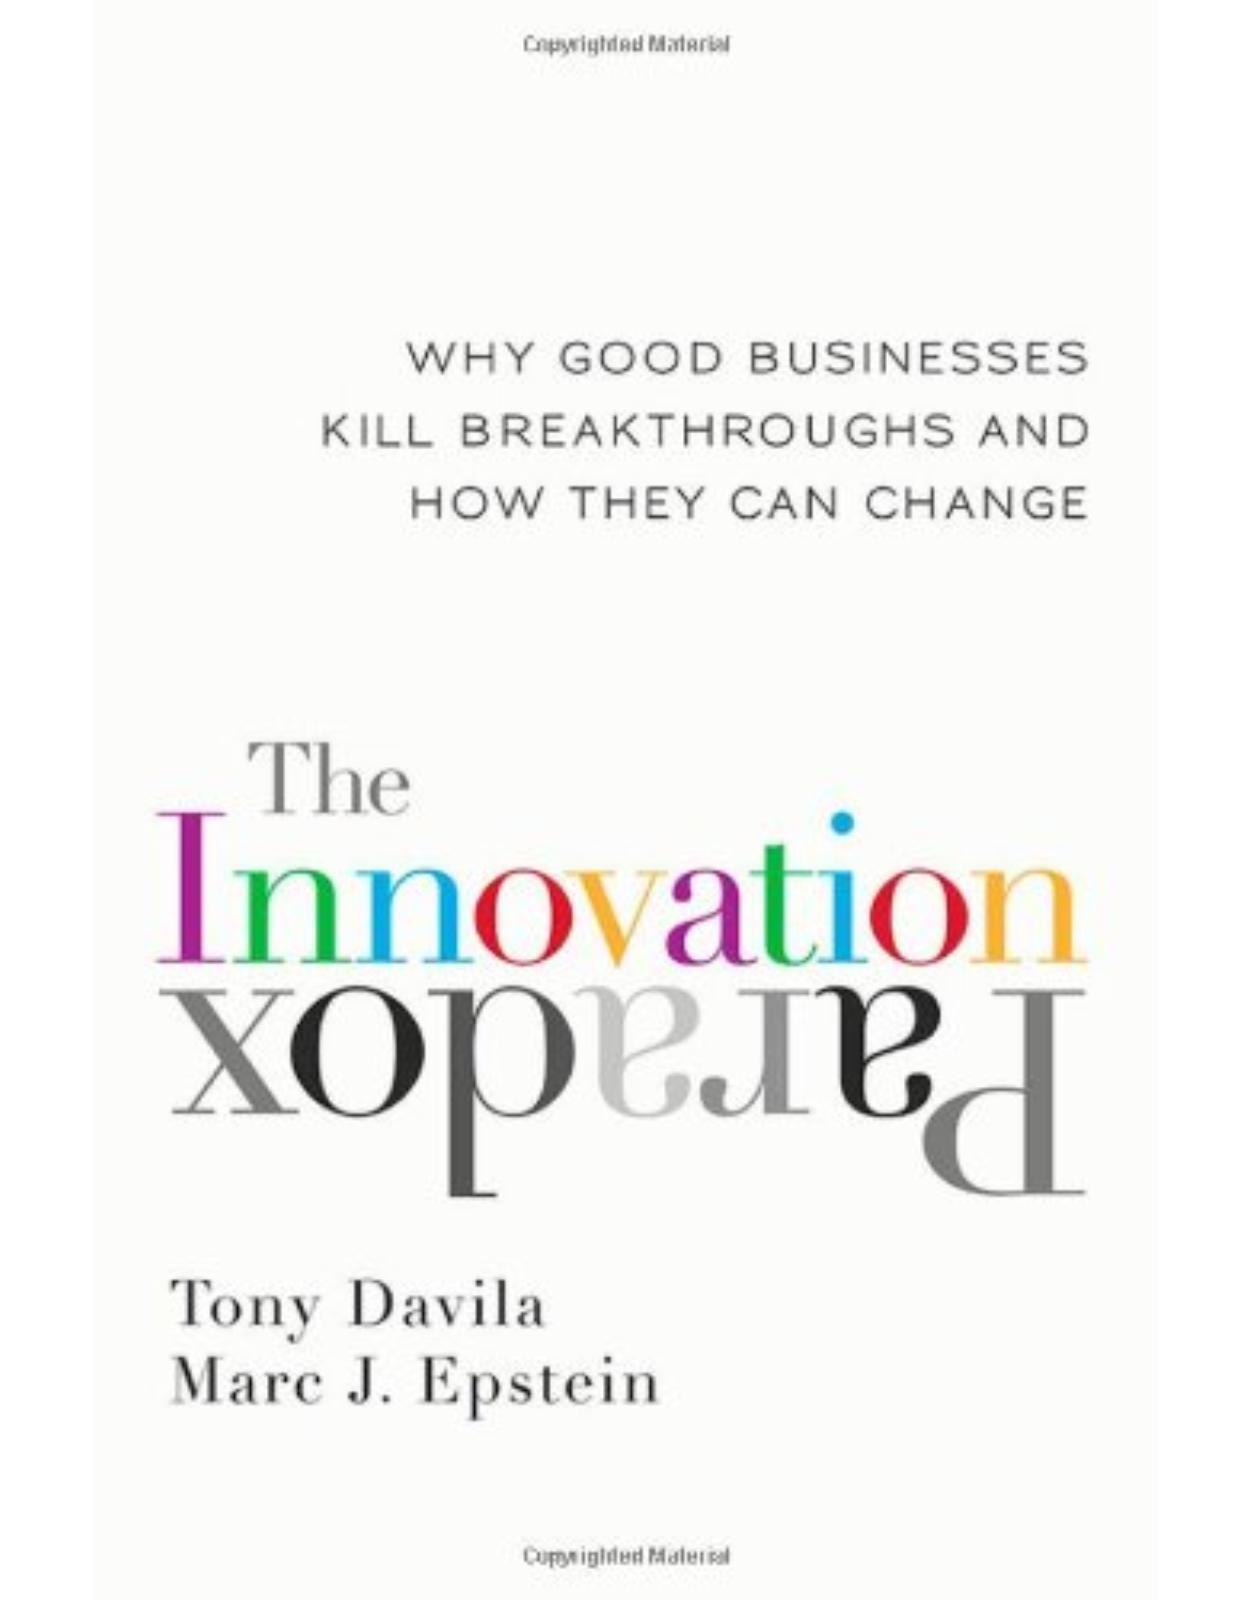 The Innovation Paradox: Why Good Businesses Kill Breakthroughs and How They Can Change (BK Business)